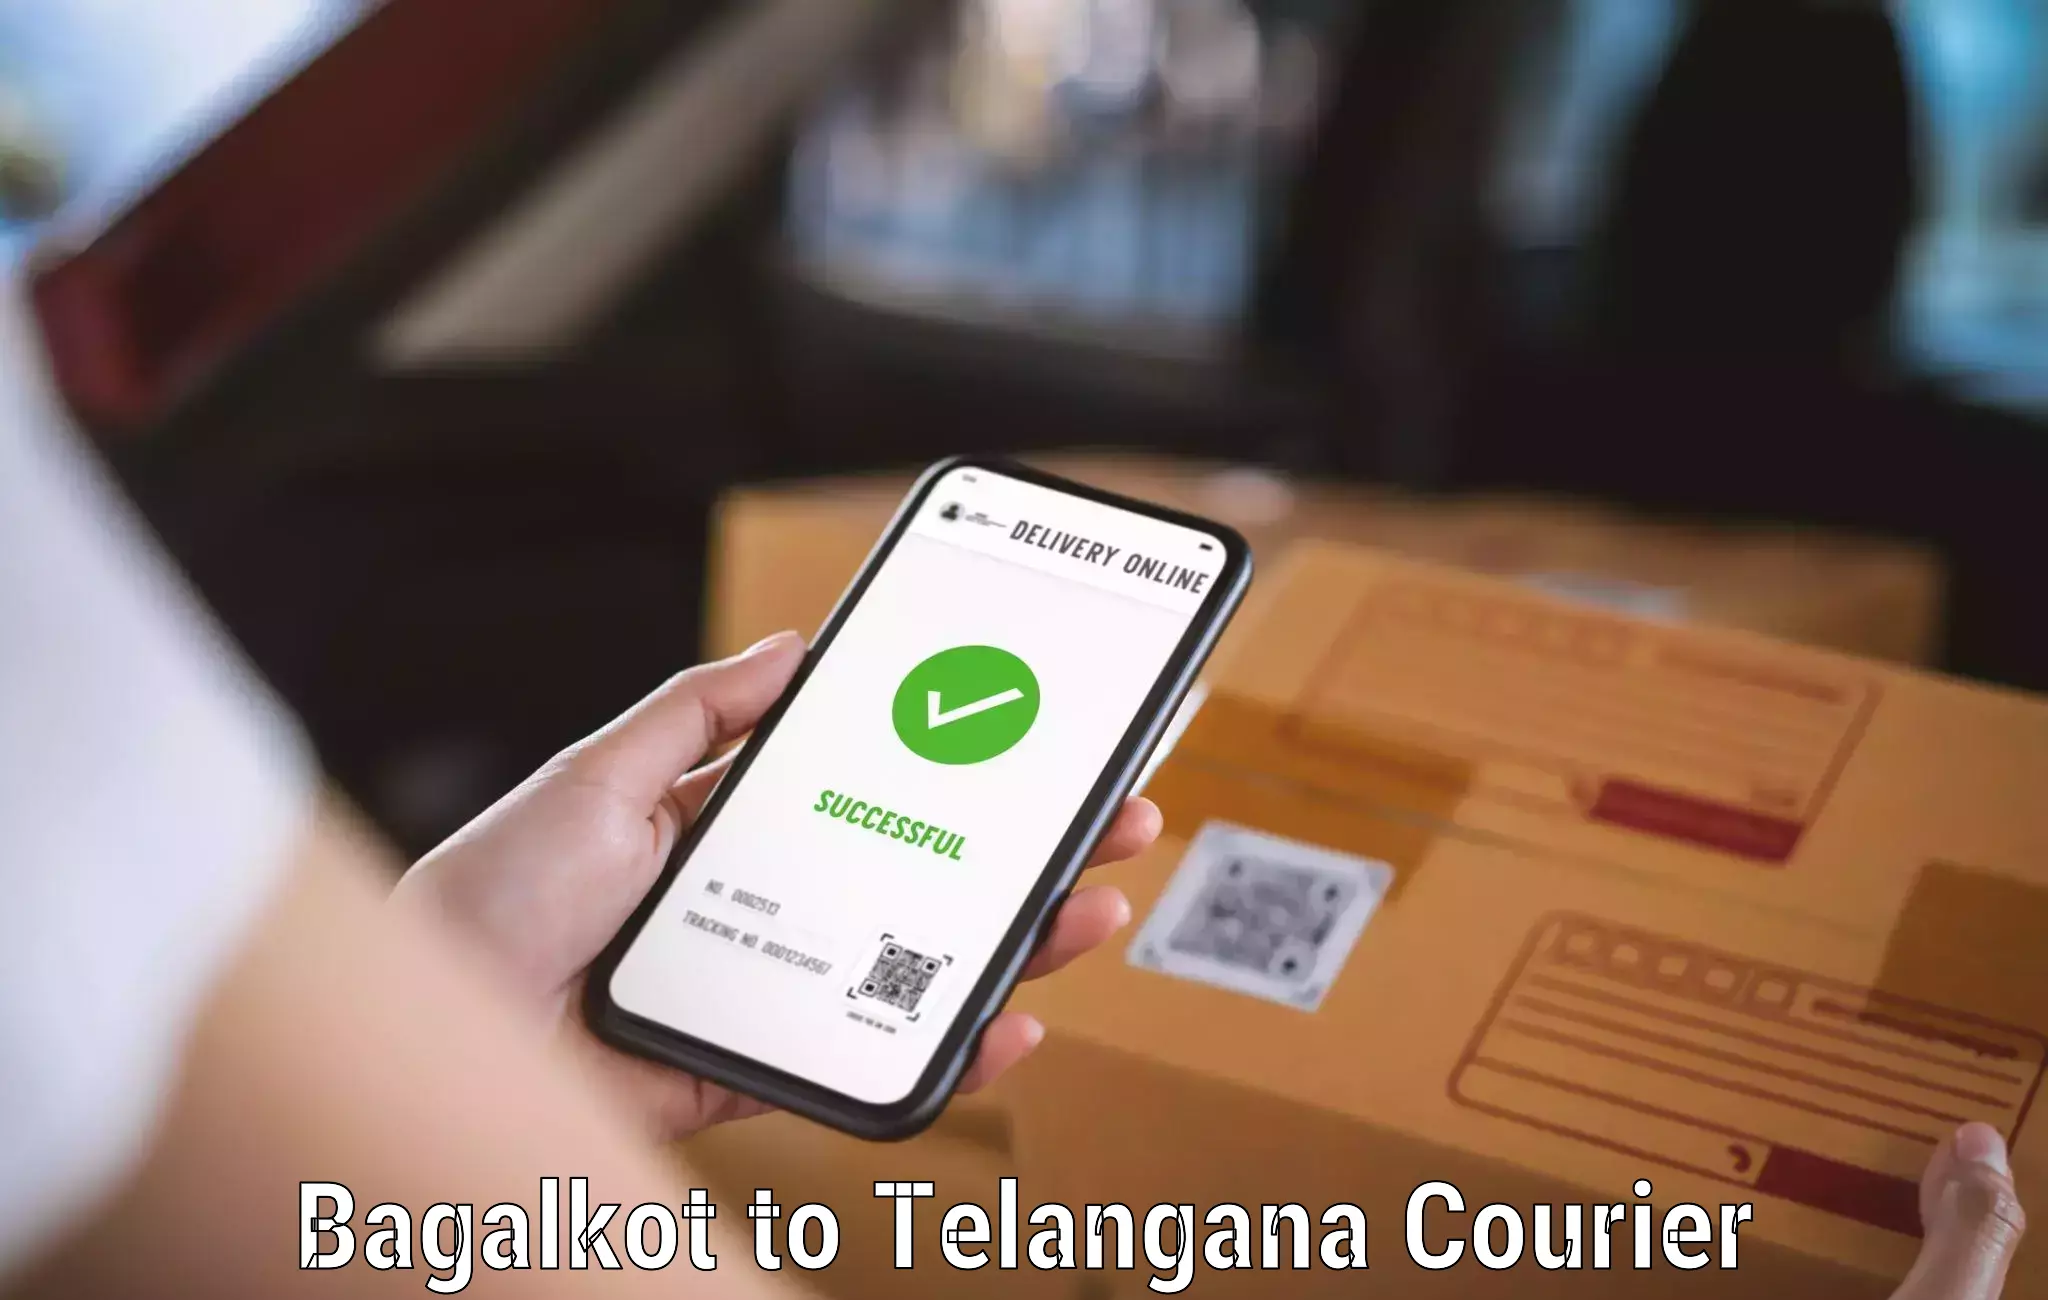 On-demand shipping options Bagalkot to Secunderabad